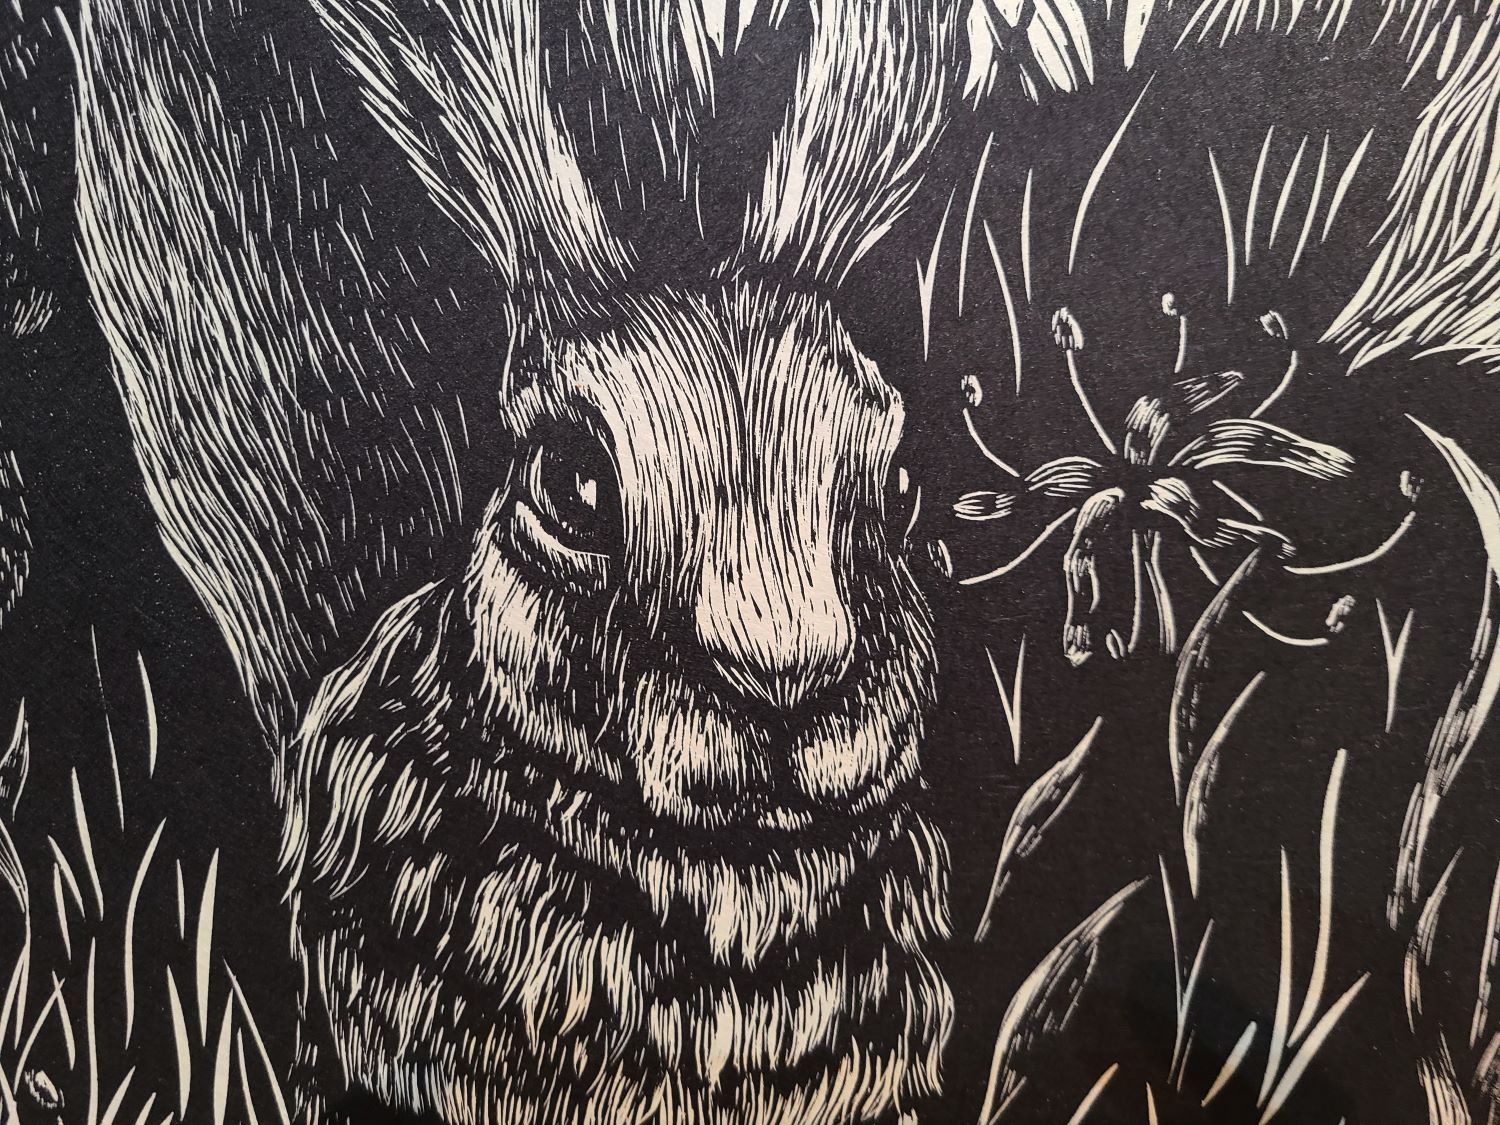 Close up of a bunny surrounded by grass and flowers in a woodcut print.